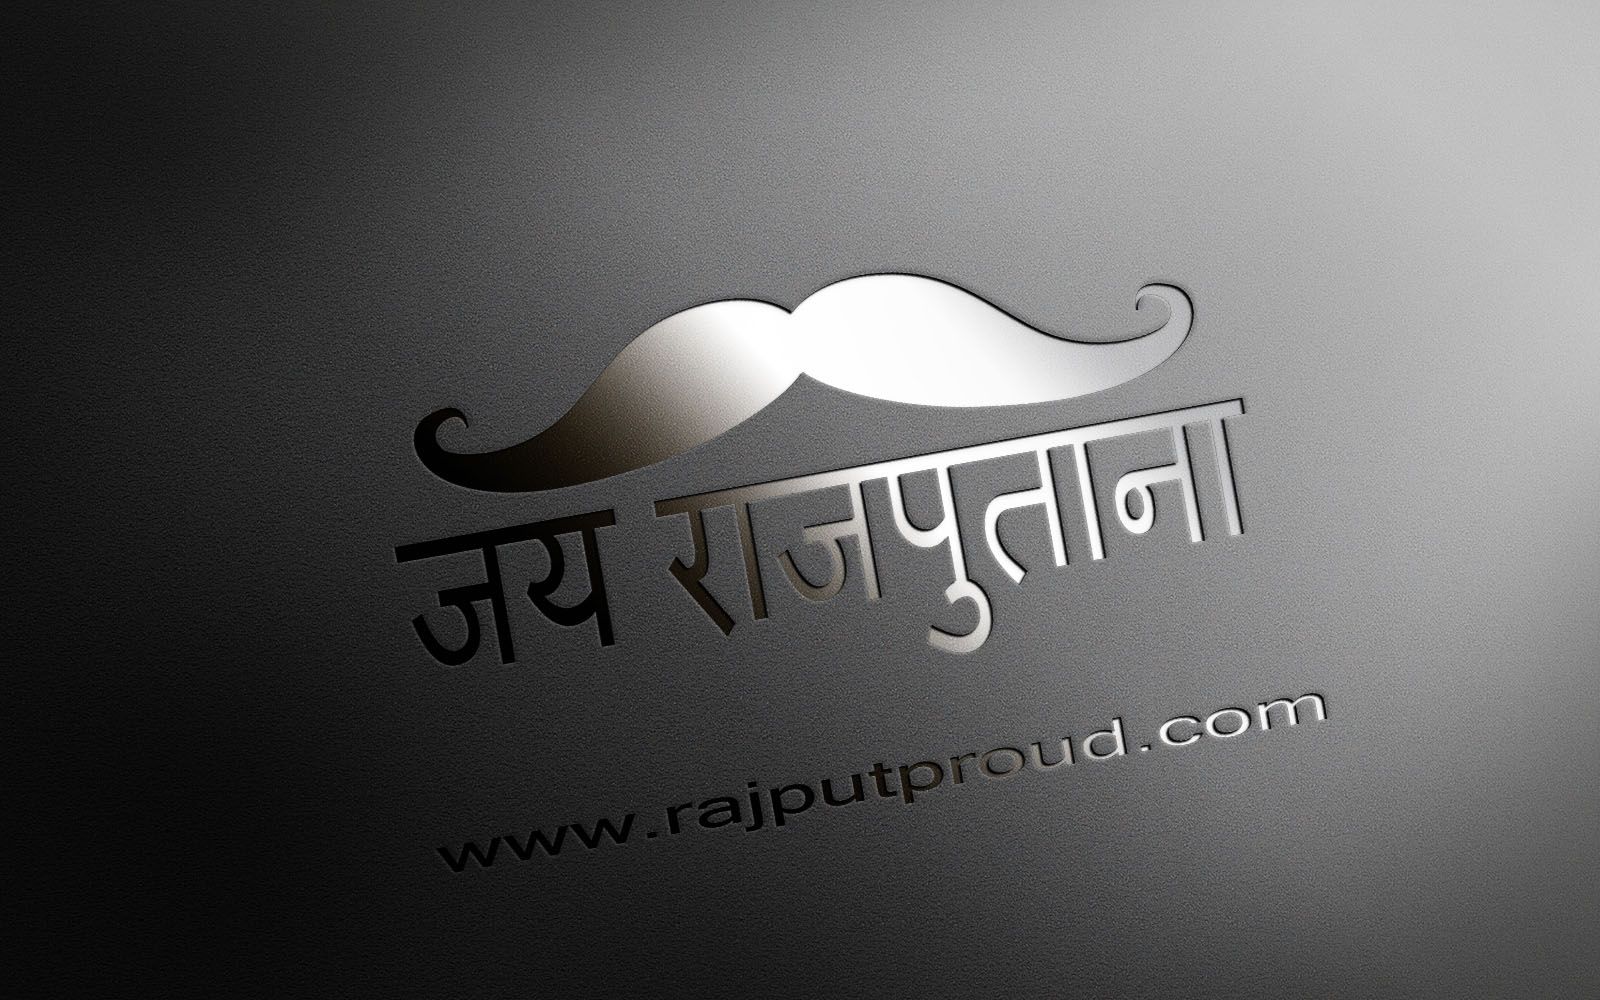 Rajputana HD Image. Rajput quotes, Cover pics for facebook, Typography quotes